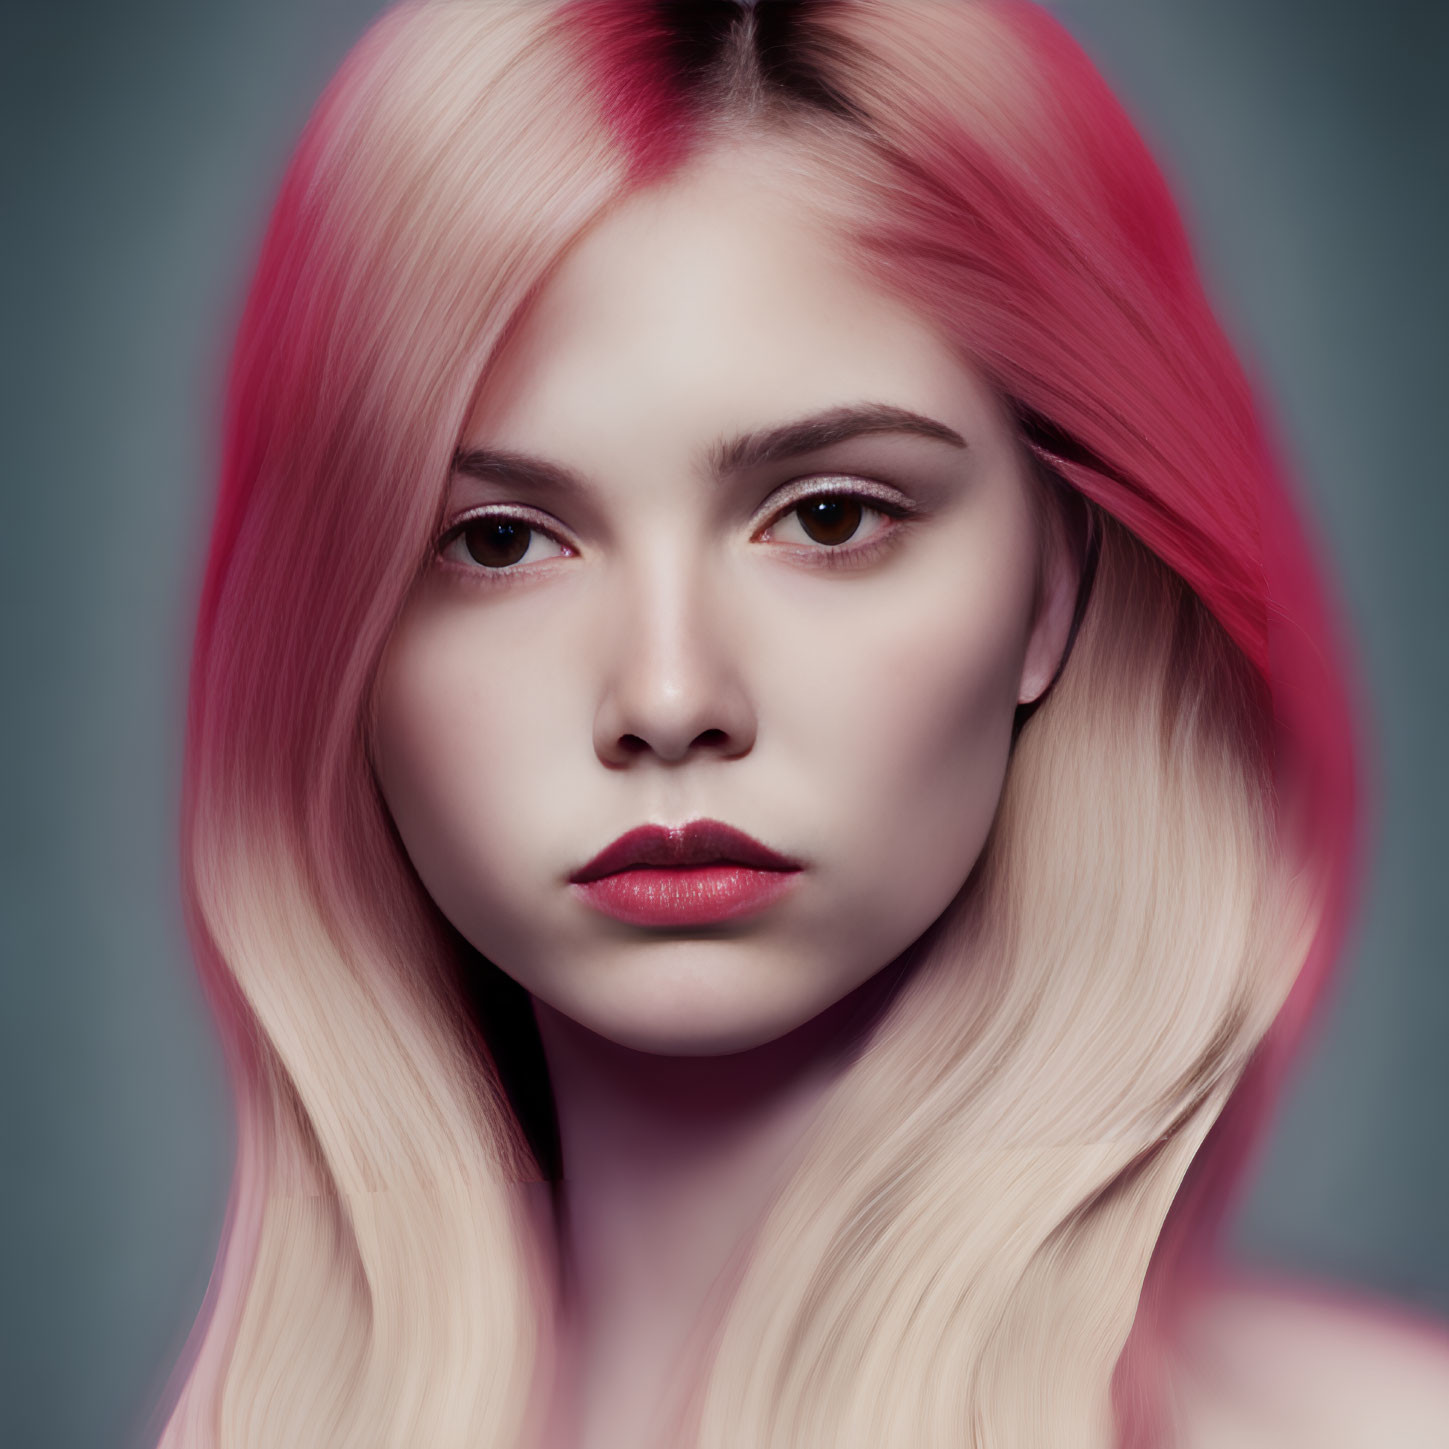 Pink and Blonde Ombre Hair with Intense Gaze on Teal Background